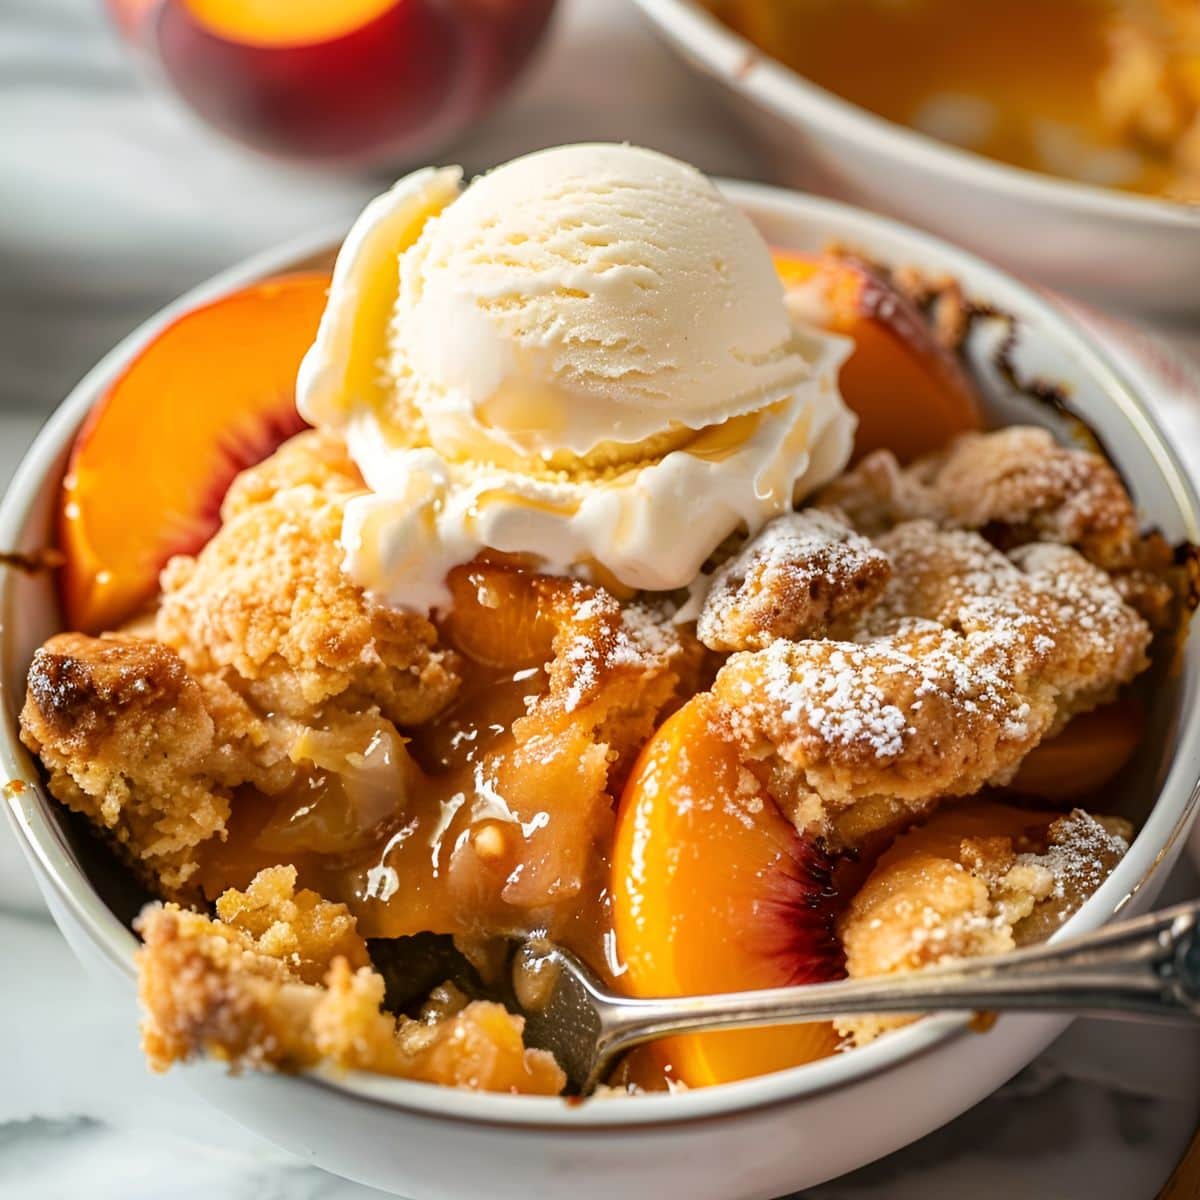 Cake Mix Cobbler with Peaches in a Serving Bowl with Vanilla Ice Cream and a Spoon